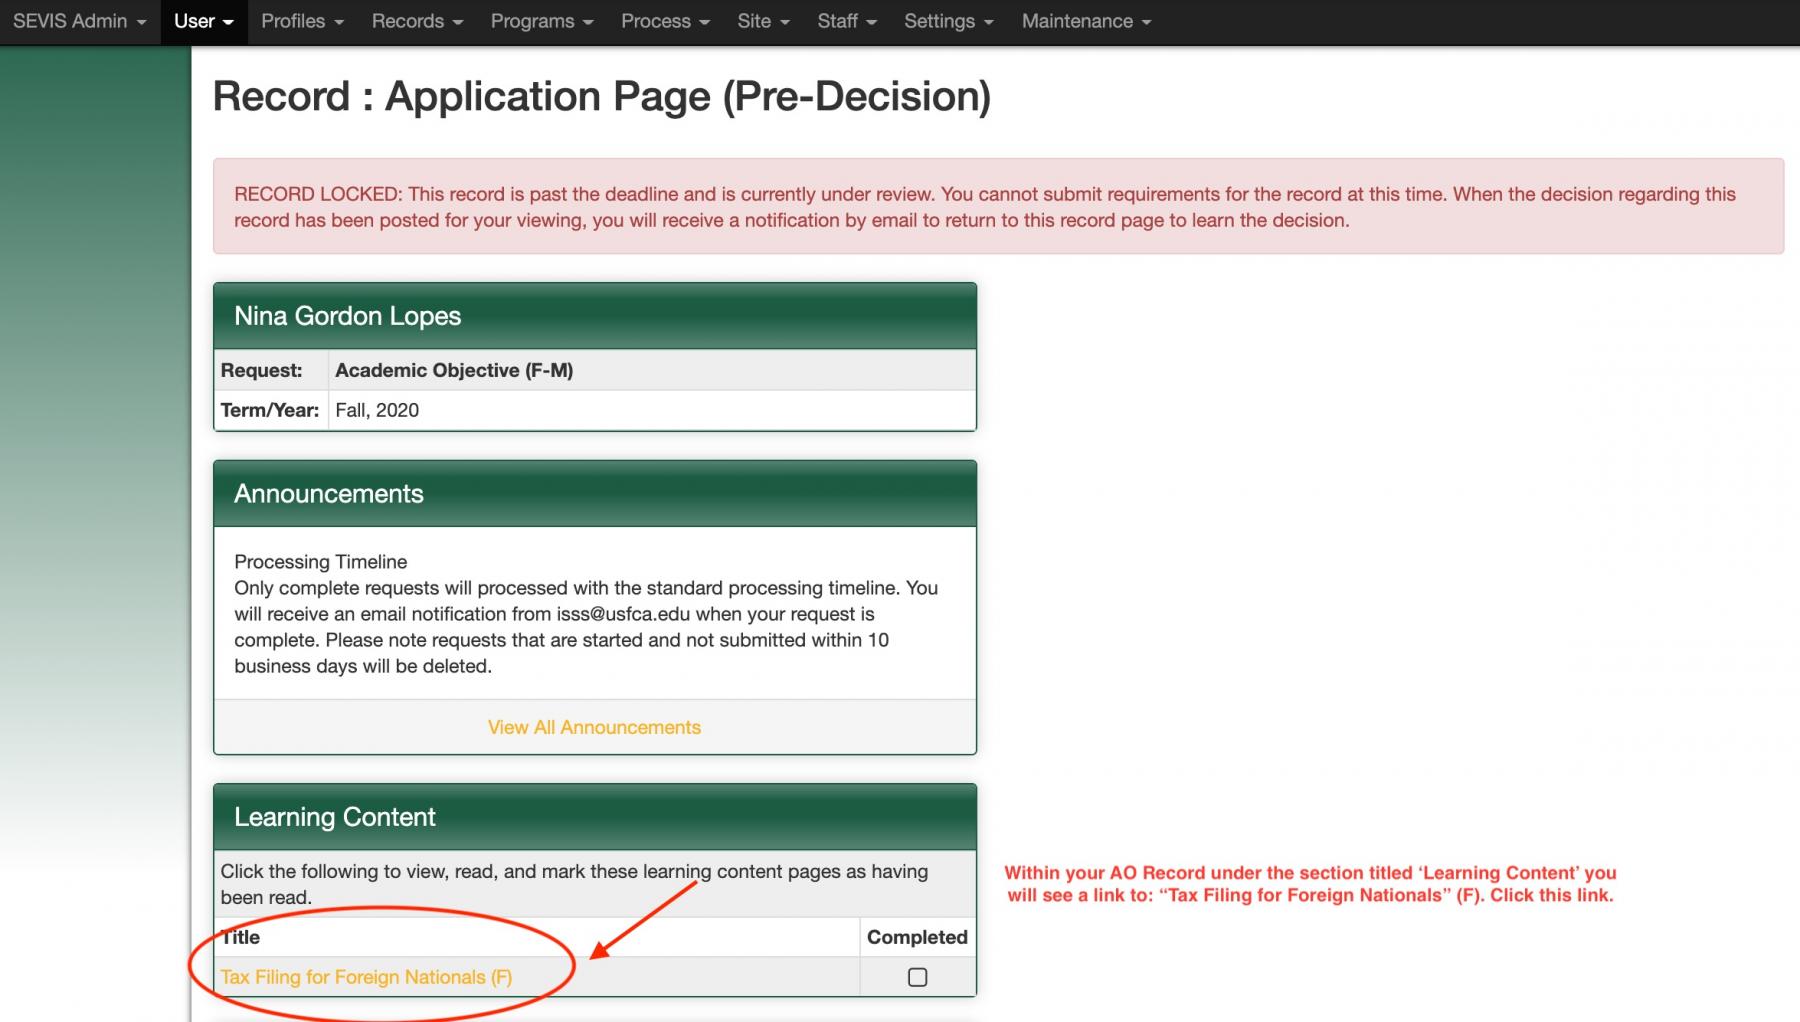 Screenshot of "Record: Application Page (pre-decision), with an arrow pointing to "Learning Content" and "Tax Filing for Foreign Nationals"